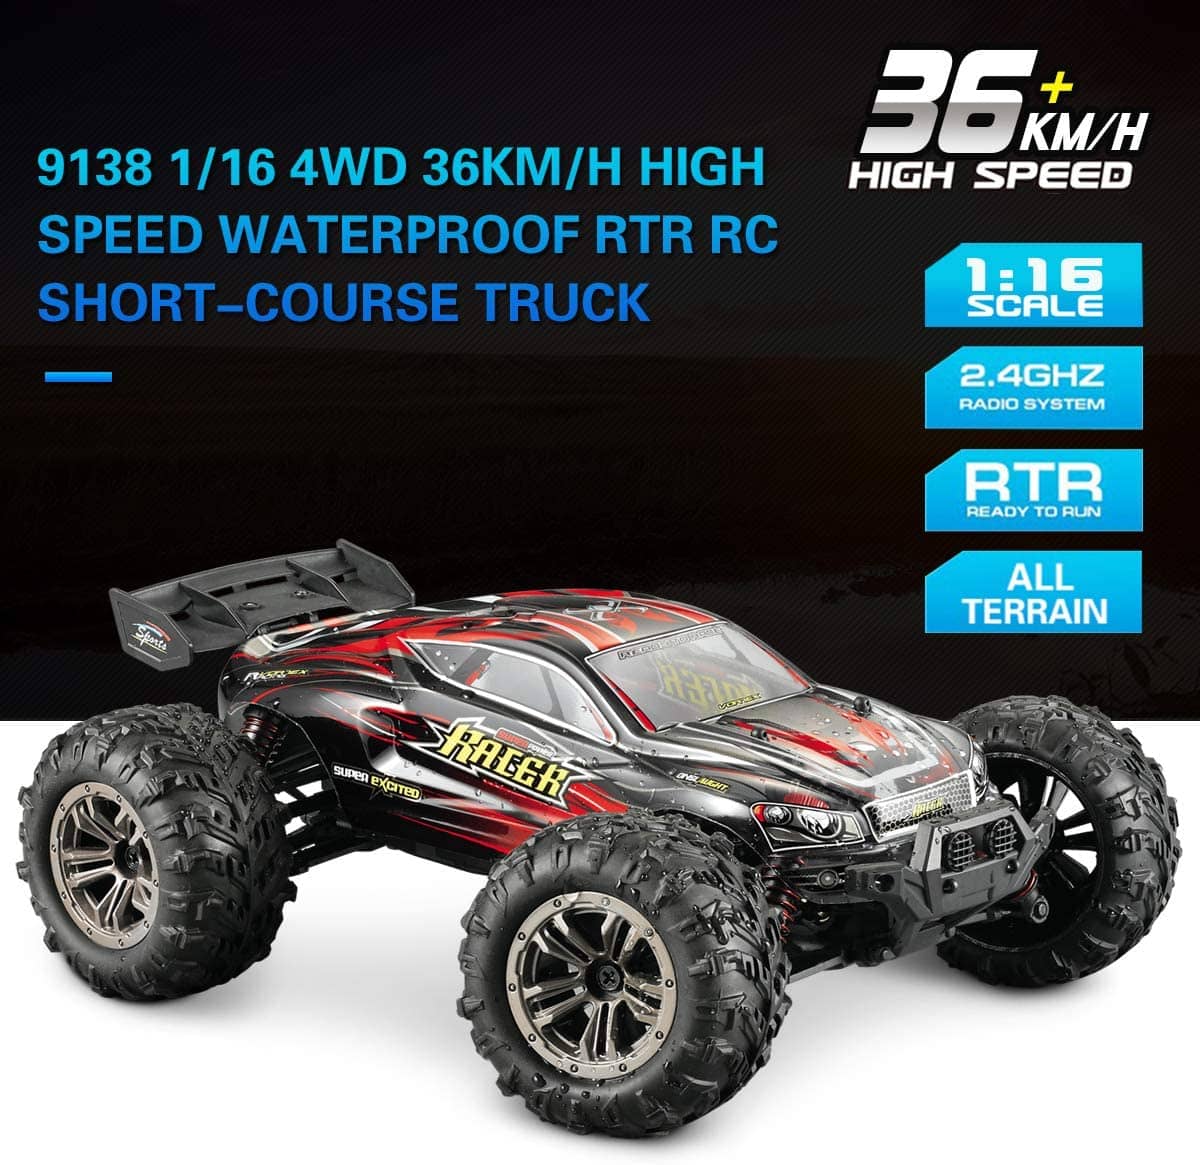 Hosim 1:16 RC Cars High Speed Remote Control Truck Radio 36+kmh 4WD Off-Road Hobby Buggy for Adults and Children 3 Batteries 40+min Play